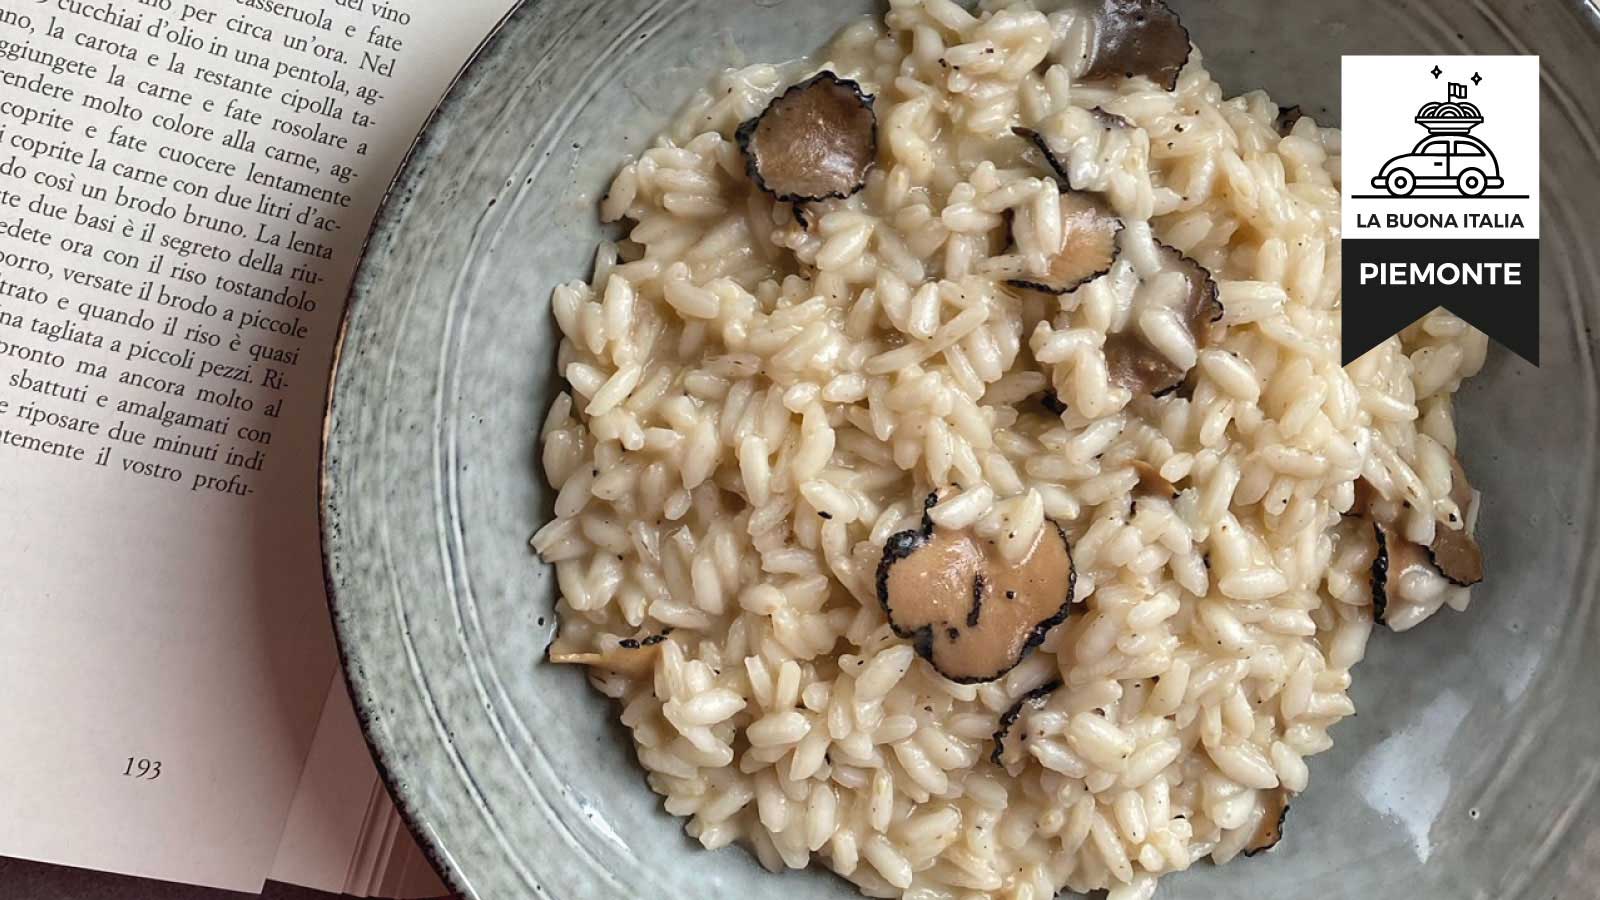 Piemonte – Risotto With Truffles